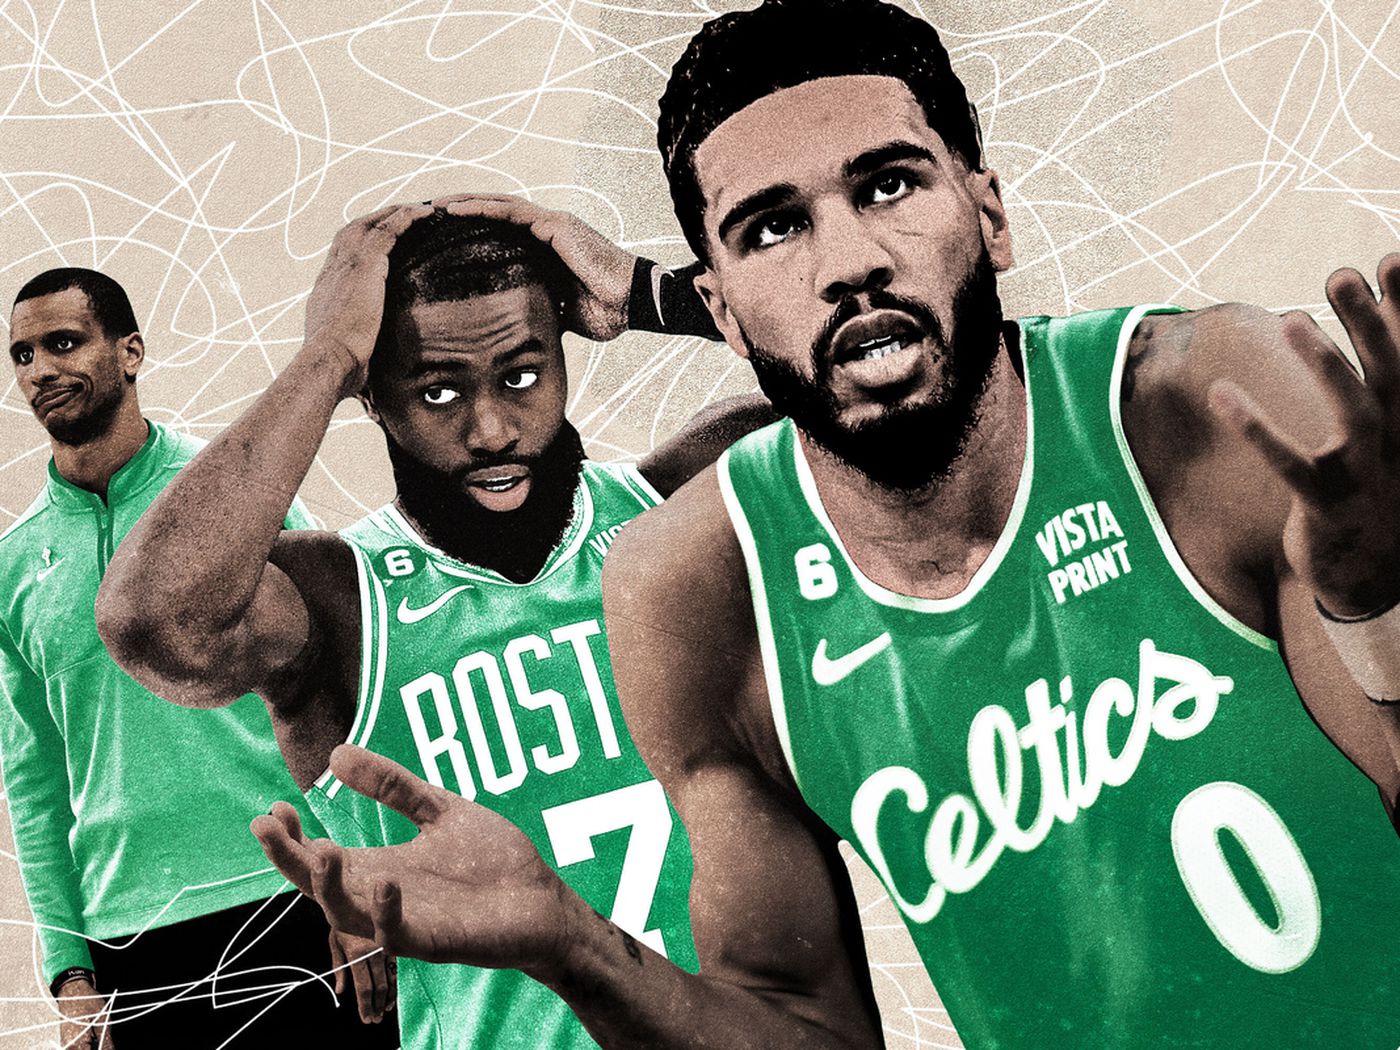 Boston Celtics: Experience Major Roster Shake-Up as Four Players Depart Today Due To